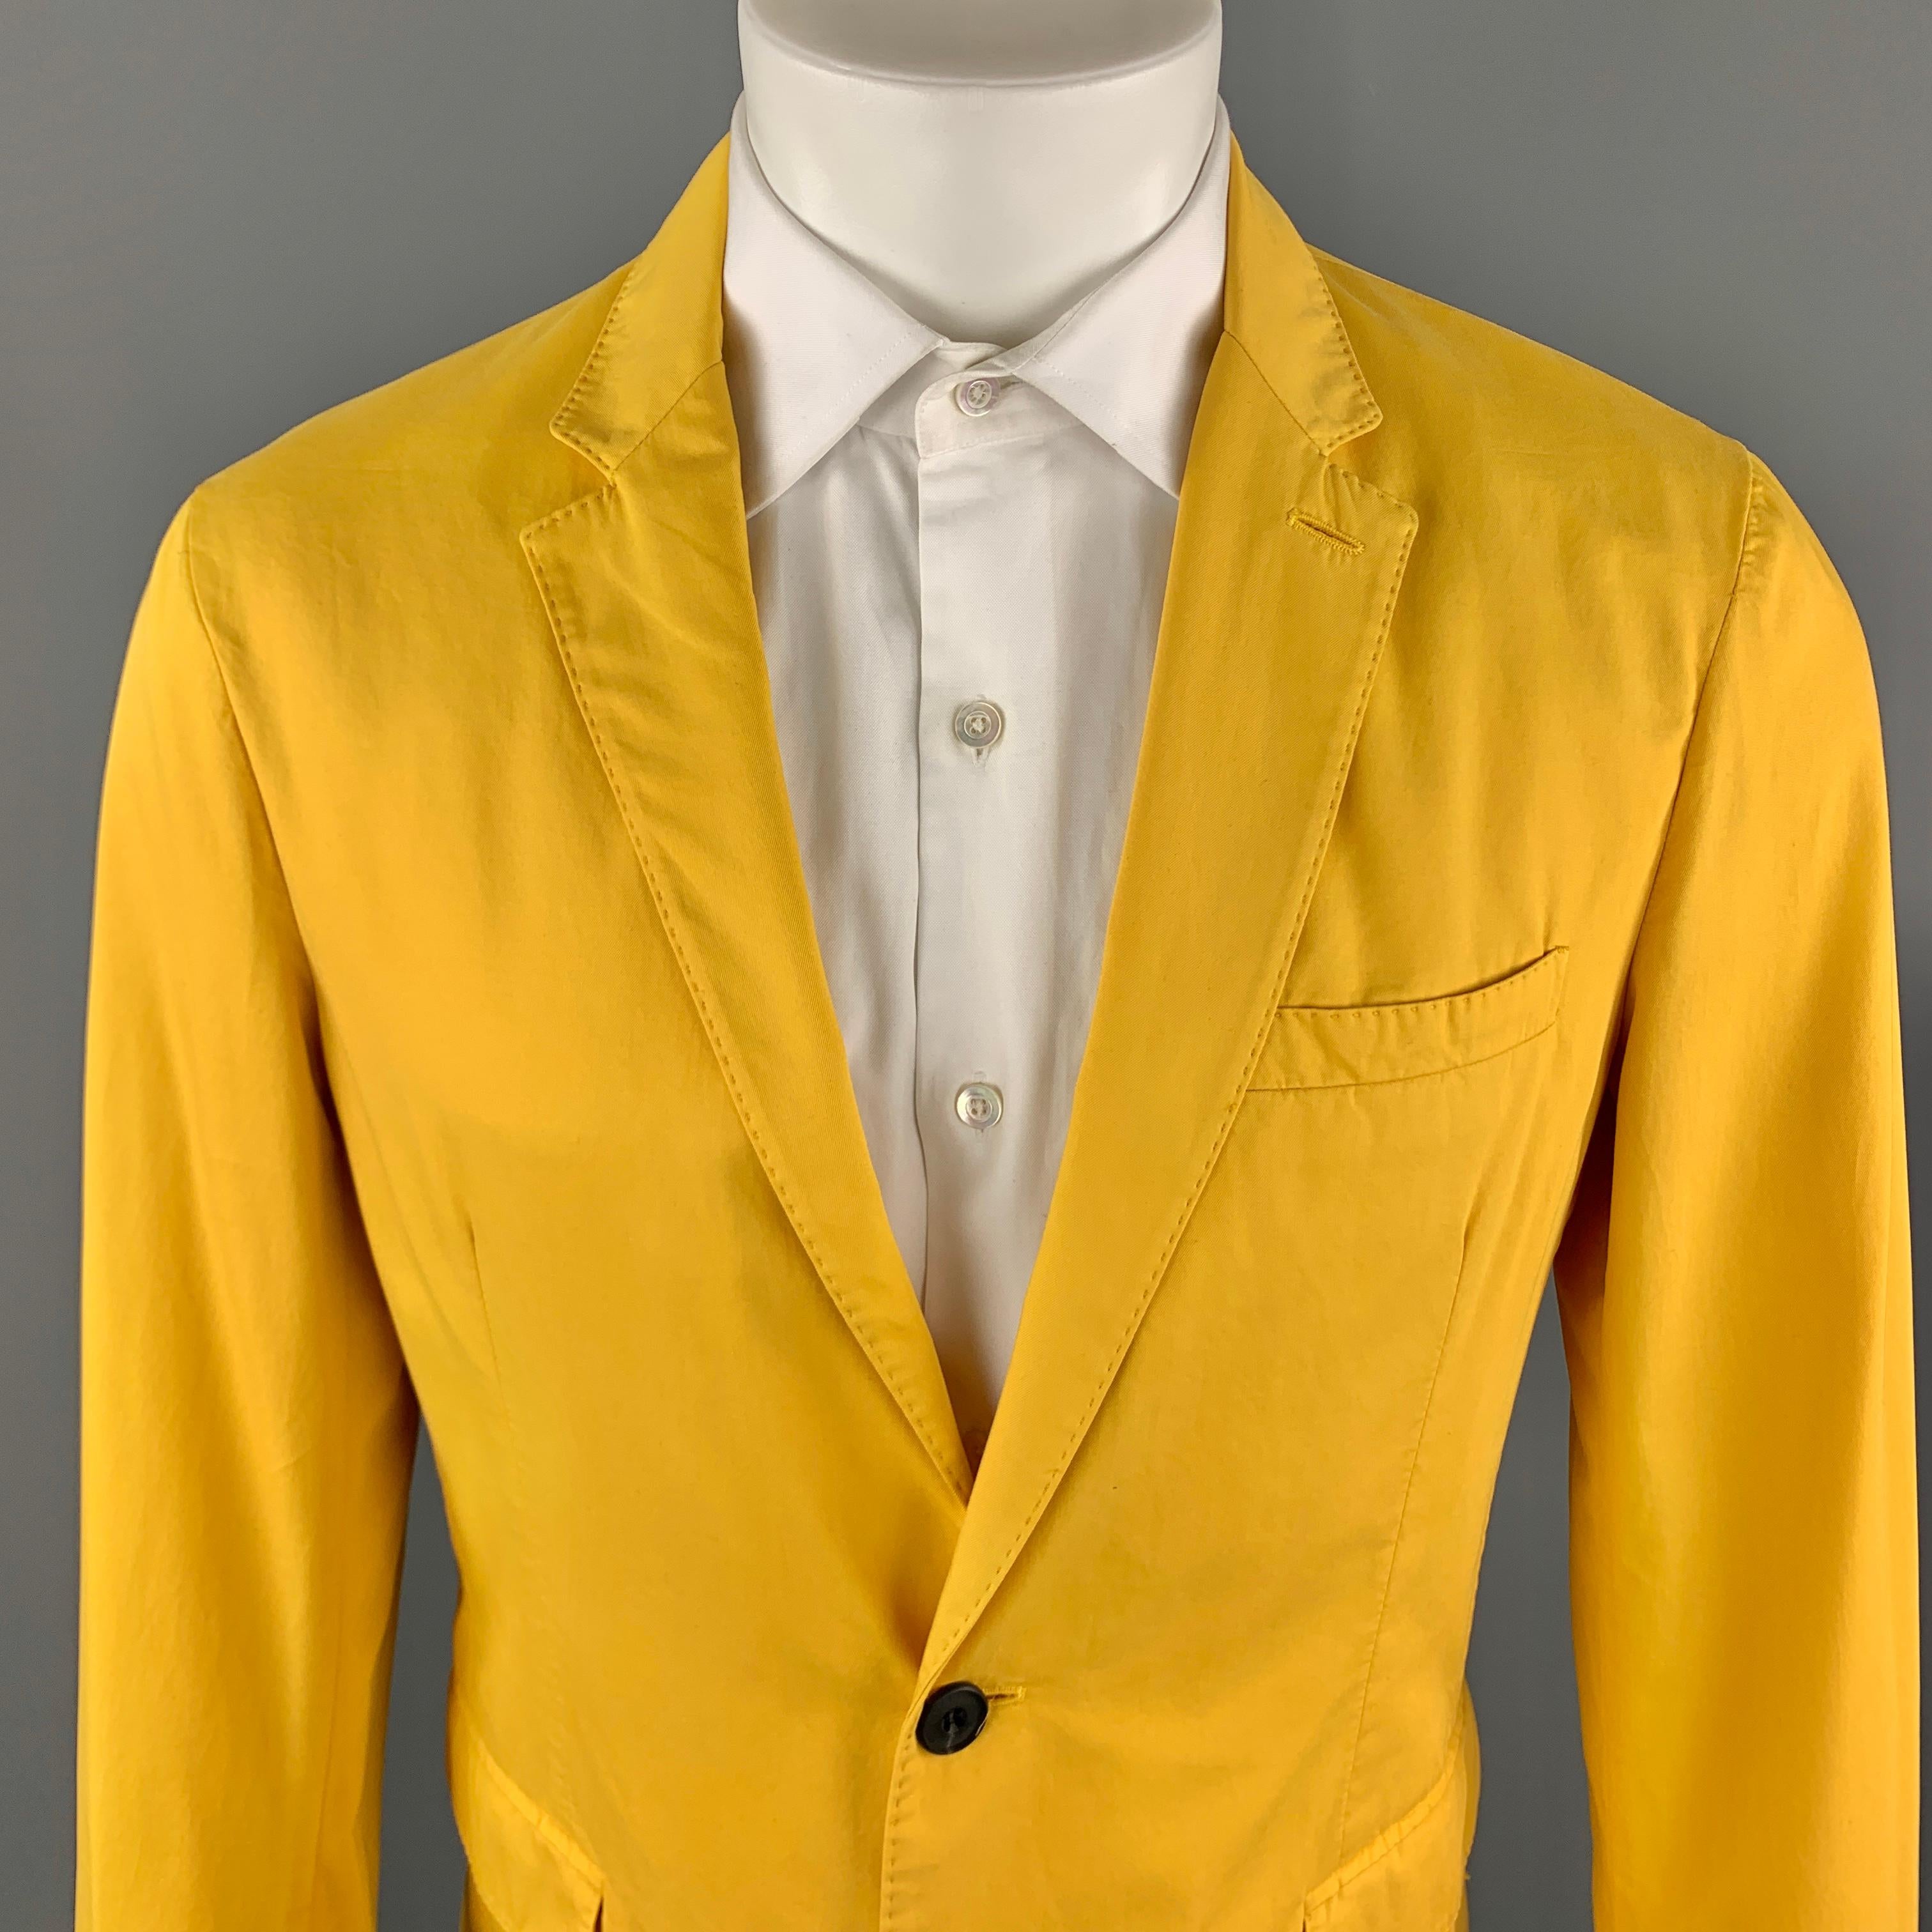 BURBERRY LONDON Sport Coat comes in a yellow solid cotton material, with a notch lapel, two buttons at closure, single breasted, slit and flap pockets, functional buttons at cuffs, a single vent at back, unlined. Made in Italy. 

Excellent Pre-Owned